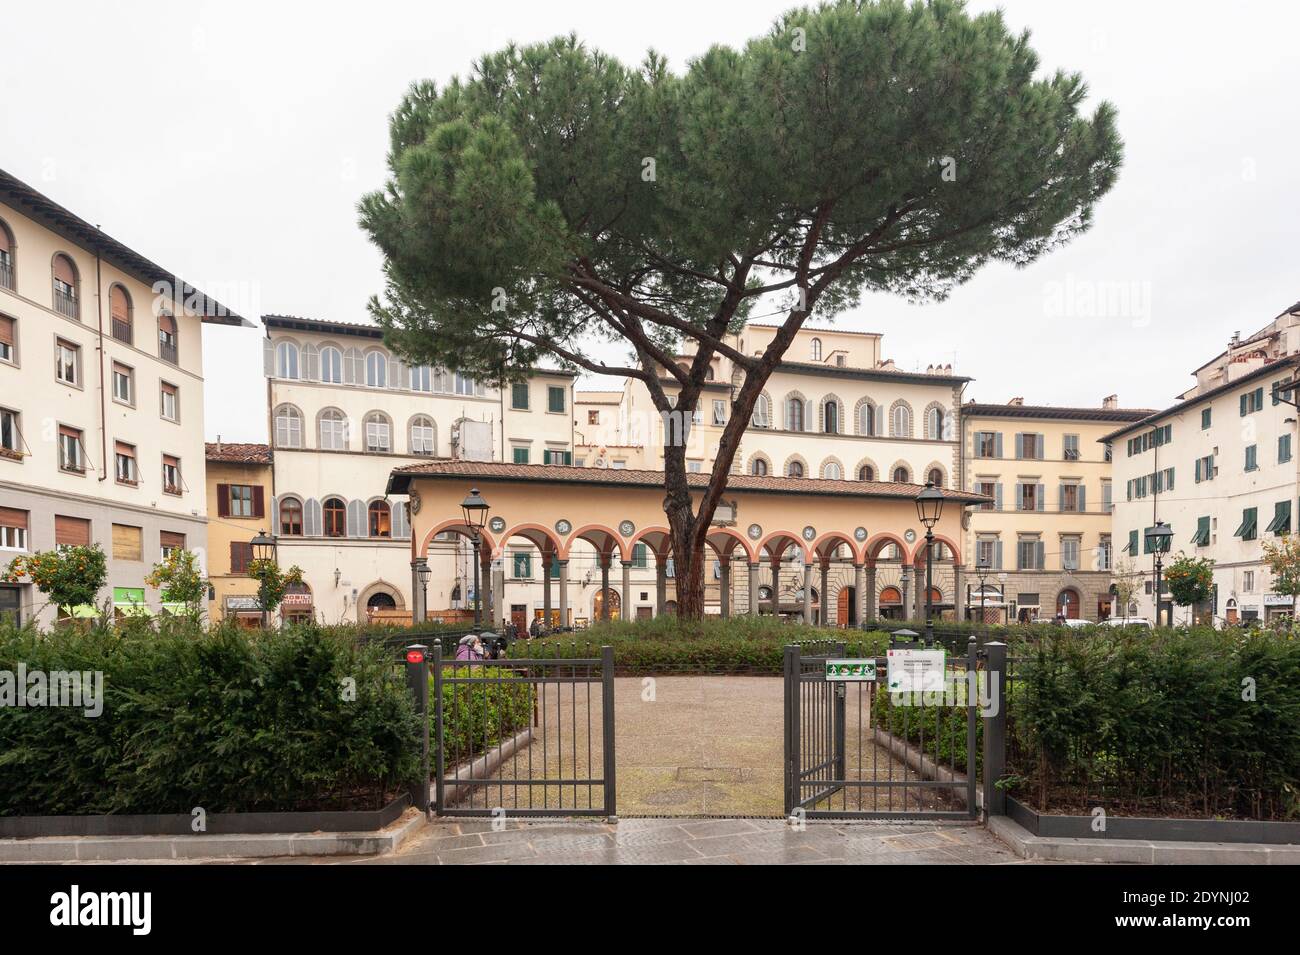 Florence, Italy - 2020, December 22: Piazza dei Ciompi is a square in the historical centre of Florence. A big old pine tree in the central flowerbed. Stock Photo